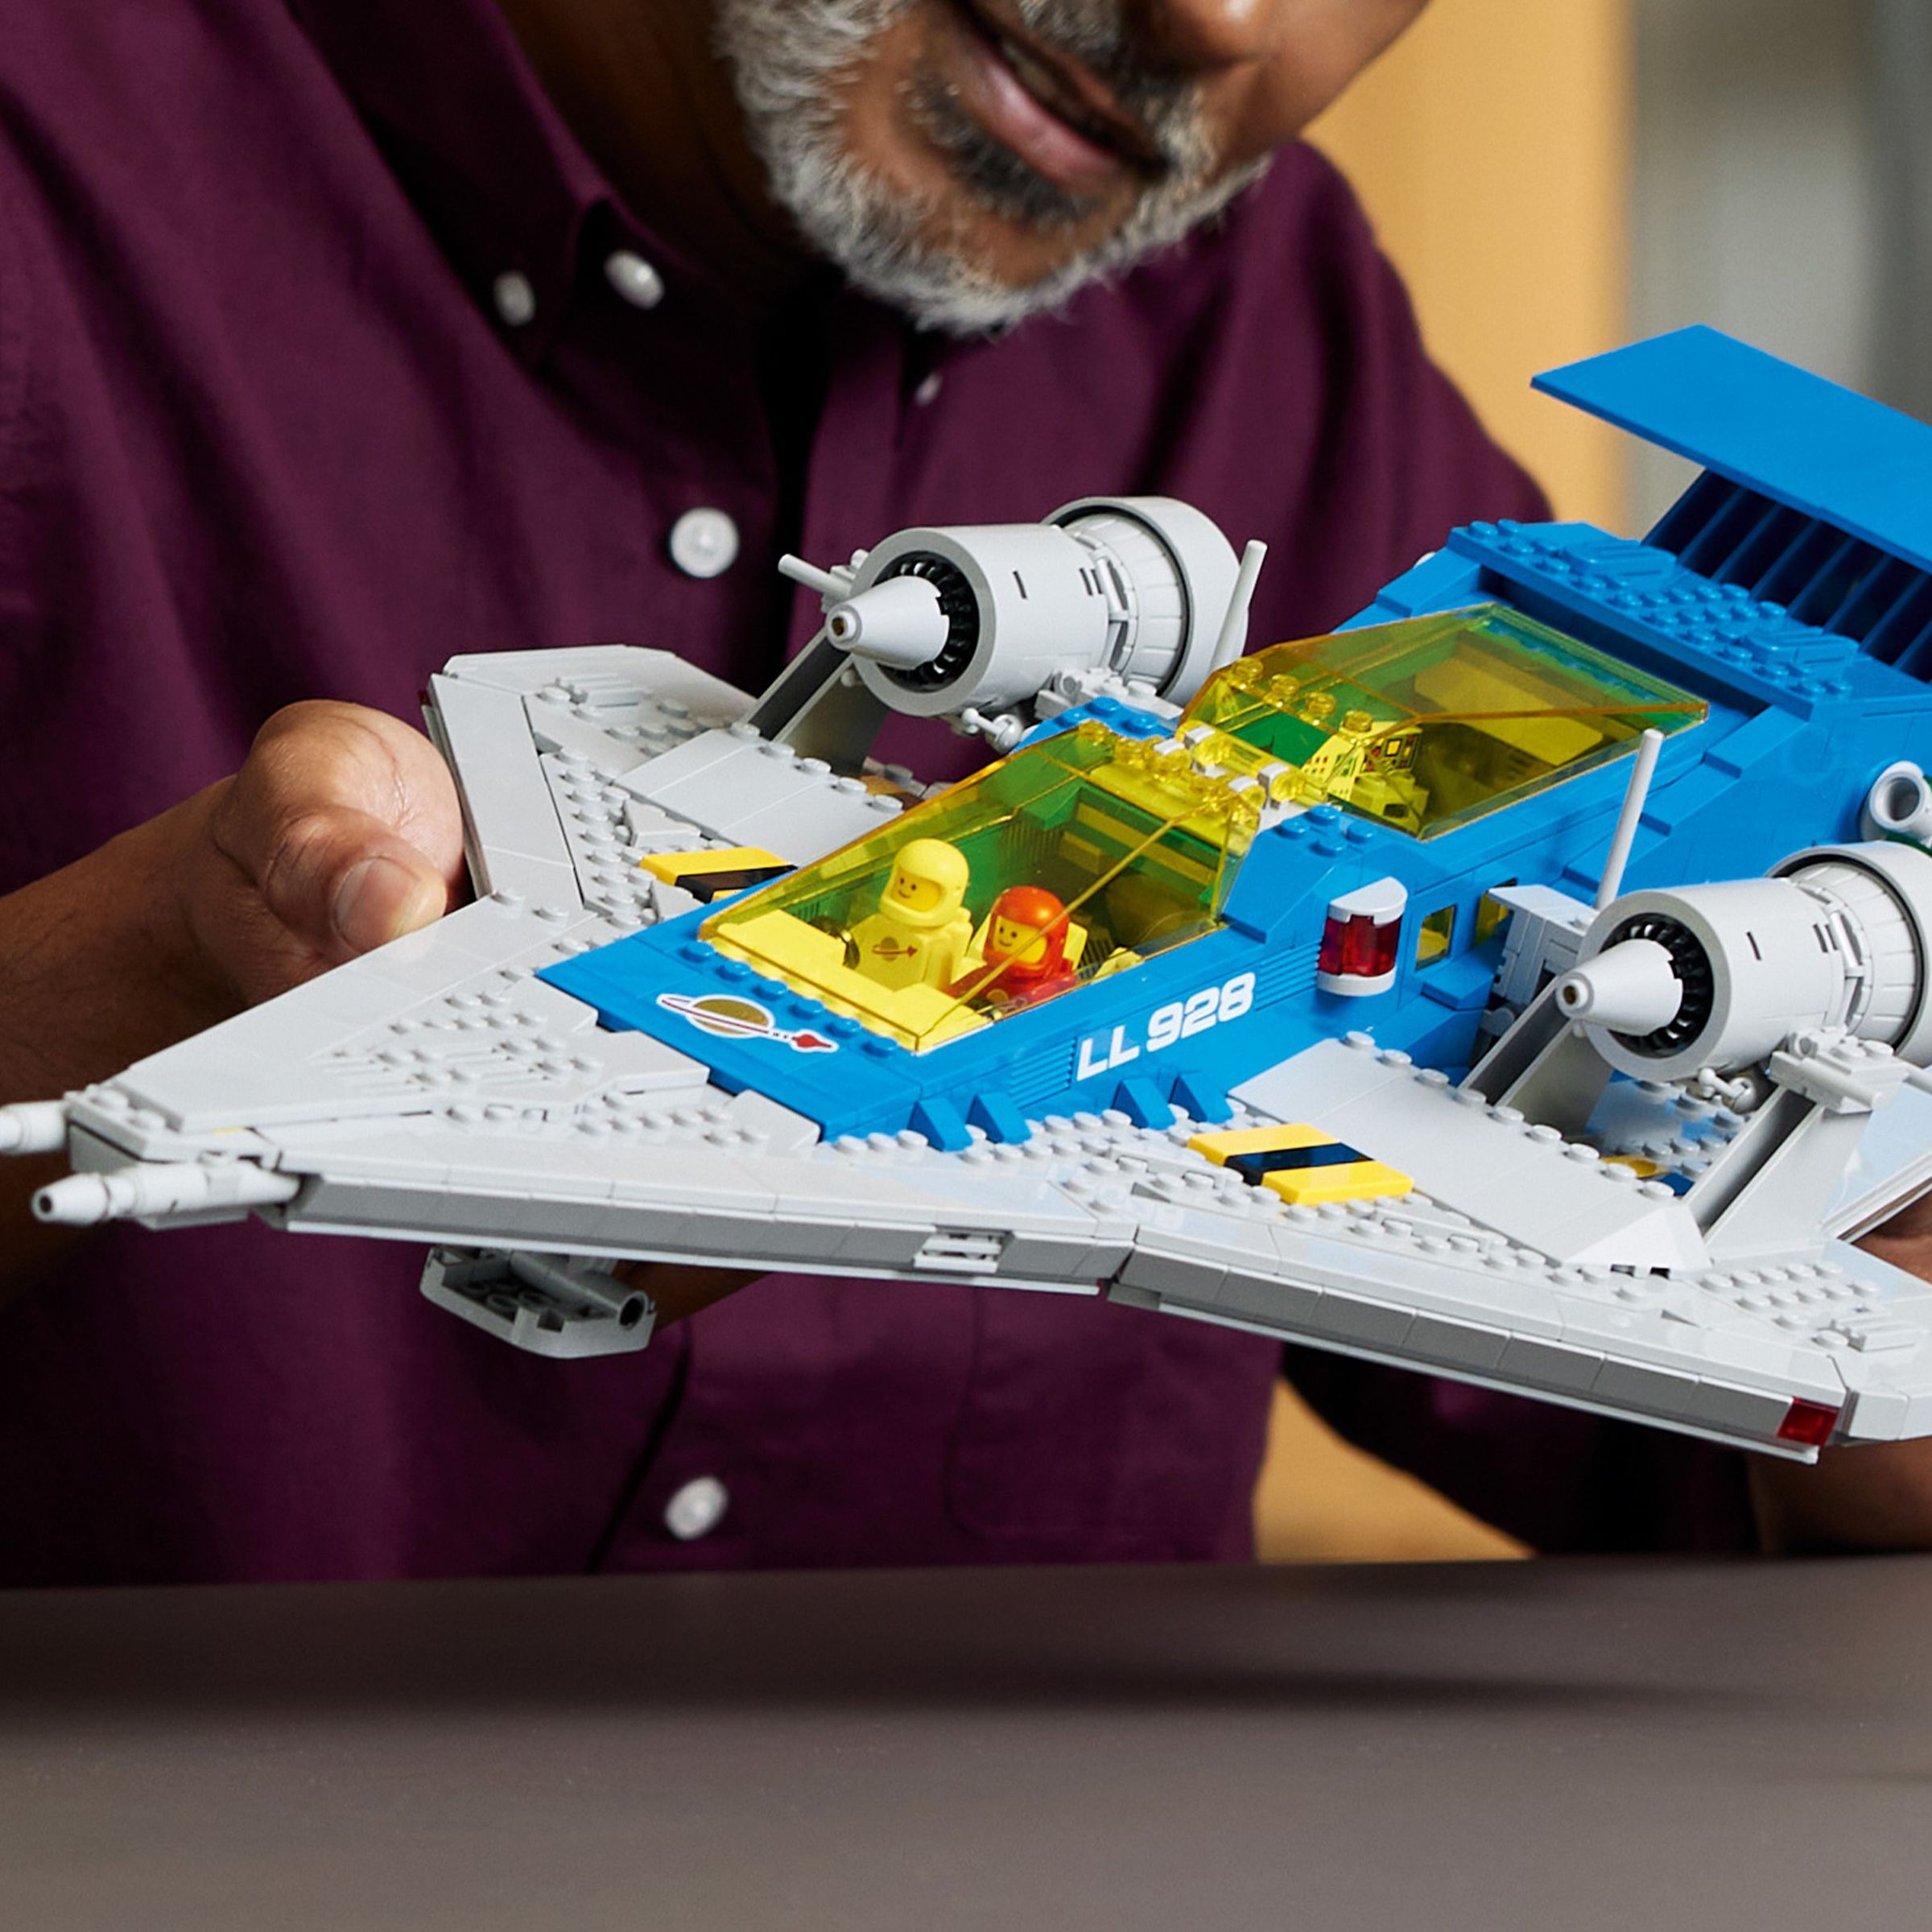 Lego’s Galaxy Explorer is a very large grey and blue spaceship with yellow translucent cockpits and lots of play features.